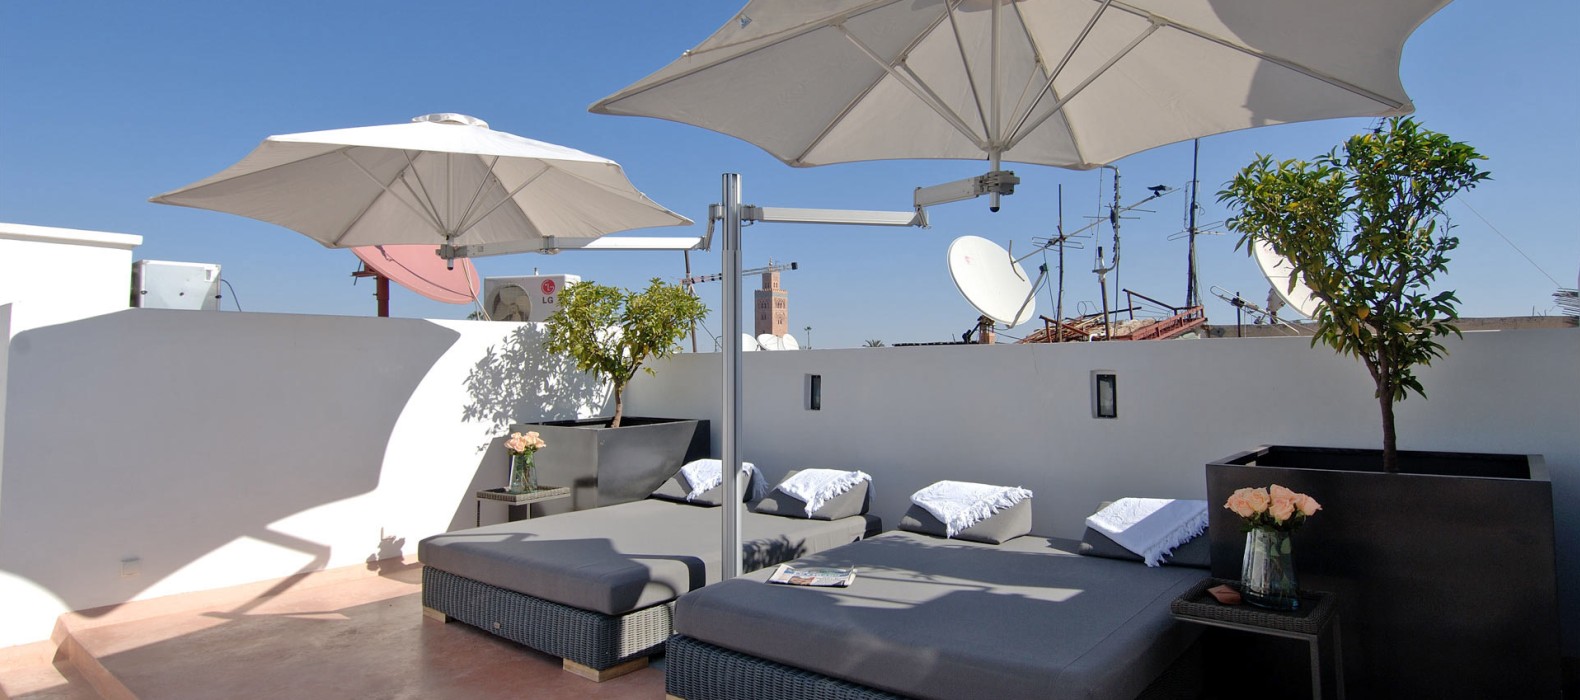 Daybeds view of Riad Zahria in Marrakech